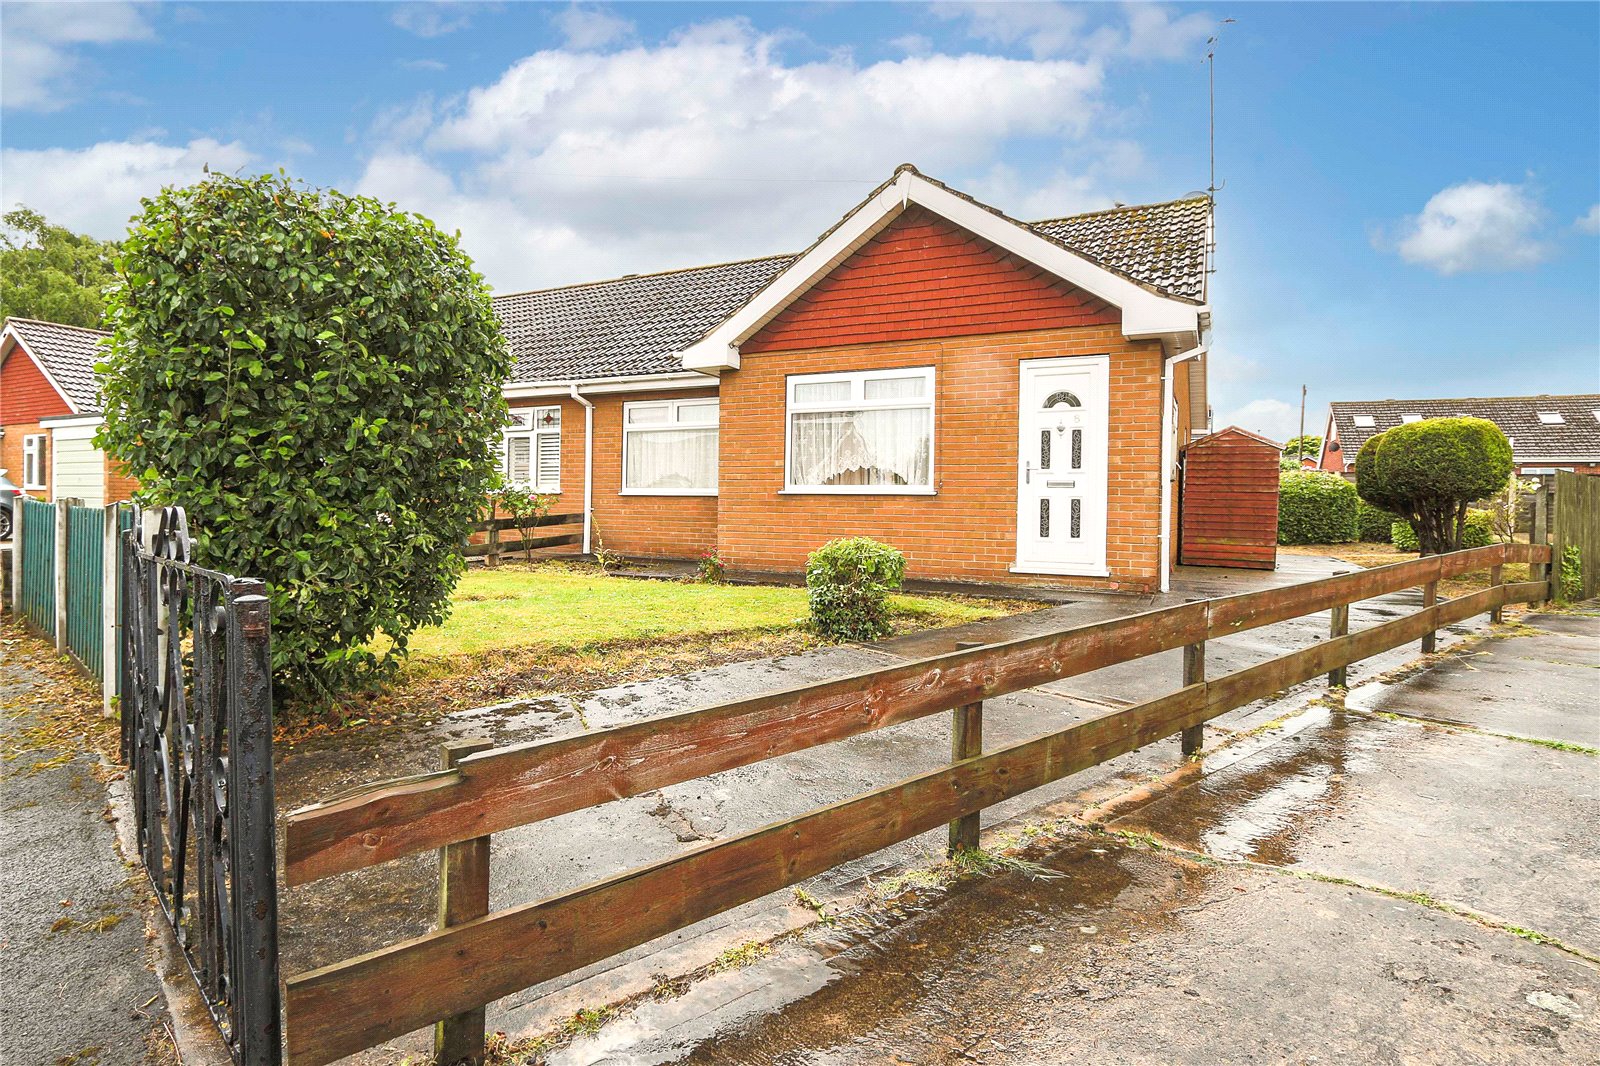 2 bed bungalow for sale in Treece Gardens, Barton-upon-Humber - Property Image 1